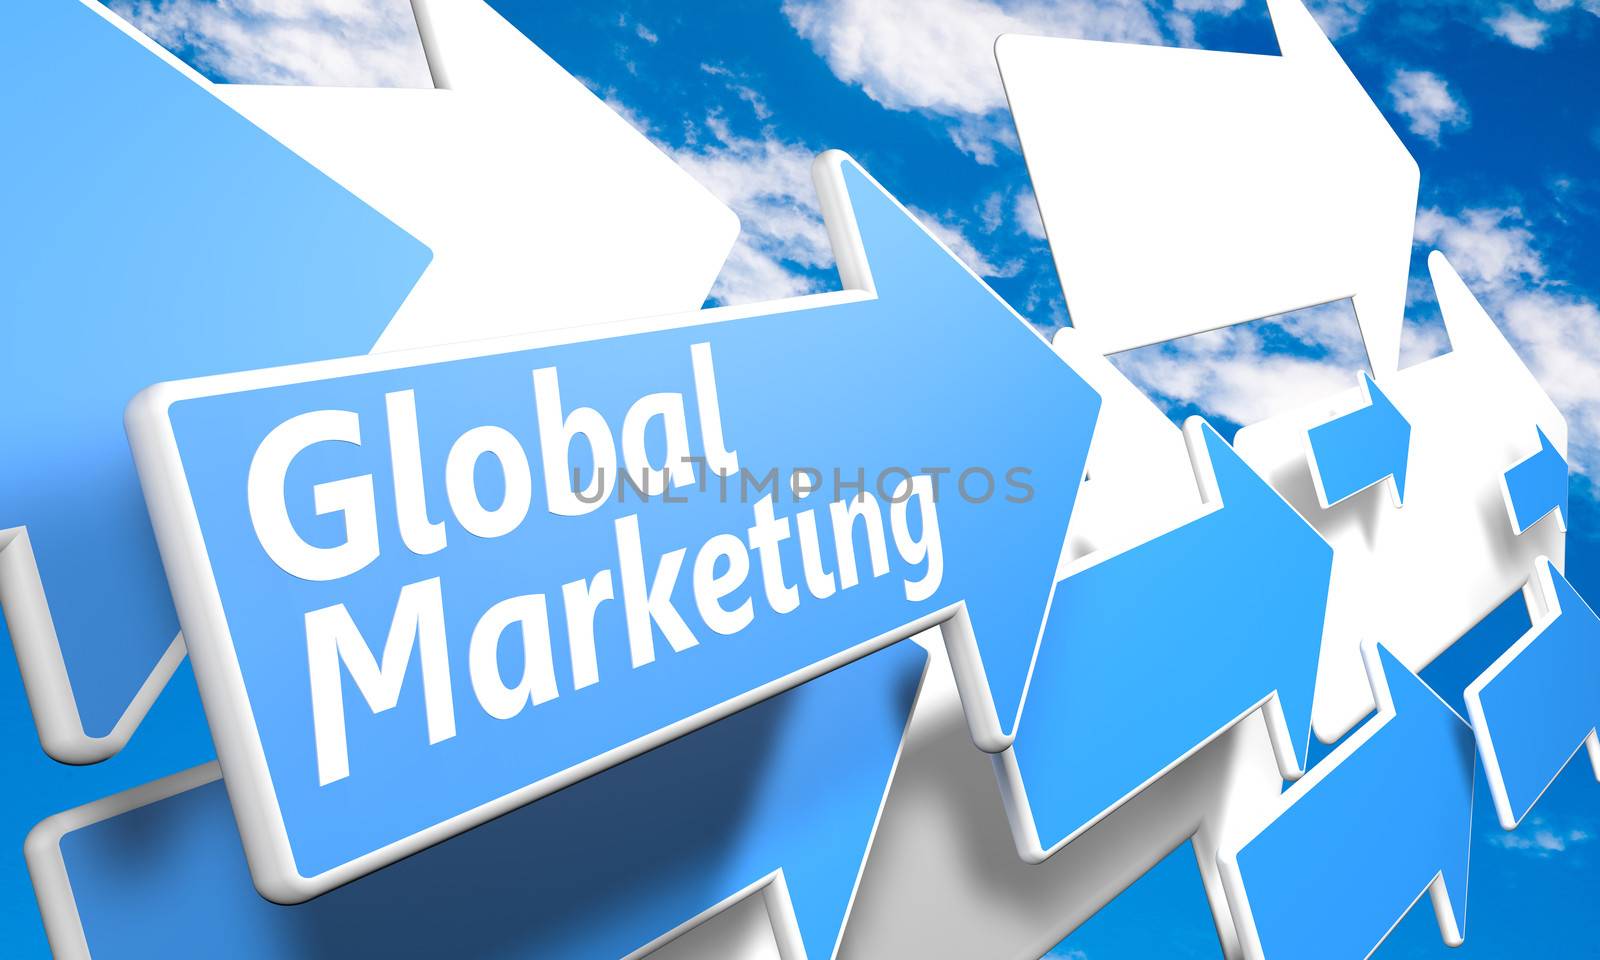 Global Marketing 3d render concept with blue and white arrows flying in a blue sky with clouds